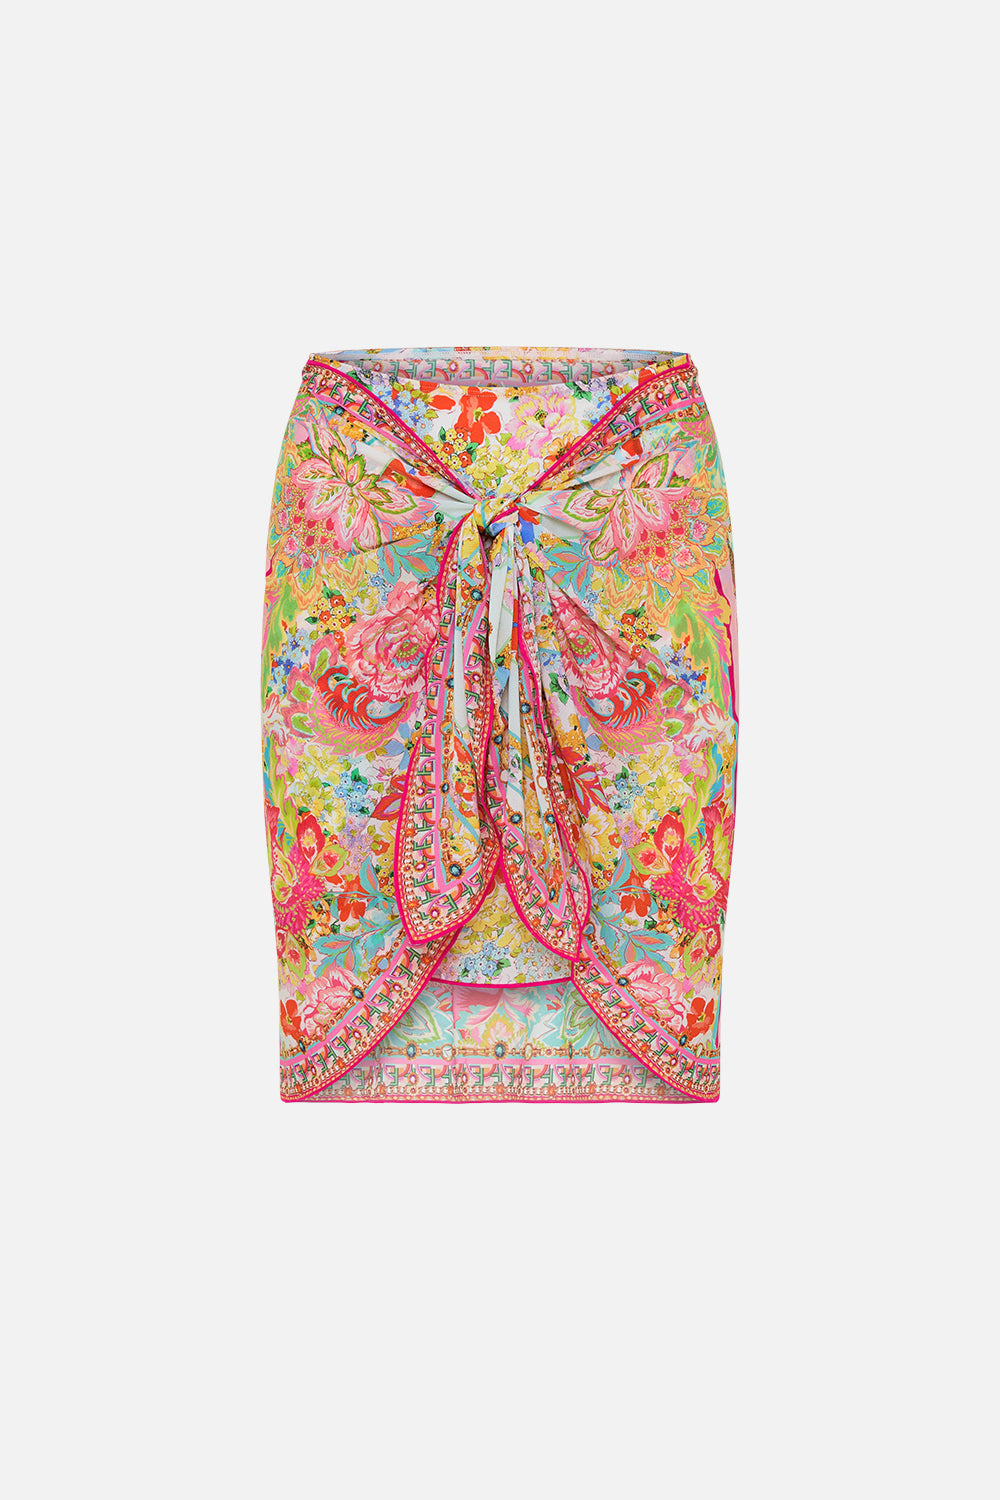 Product view of CAMILLA resortwear short sarong in An Italian Welcome print